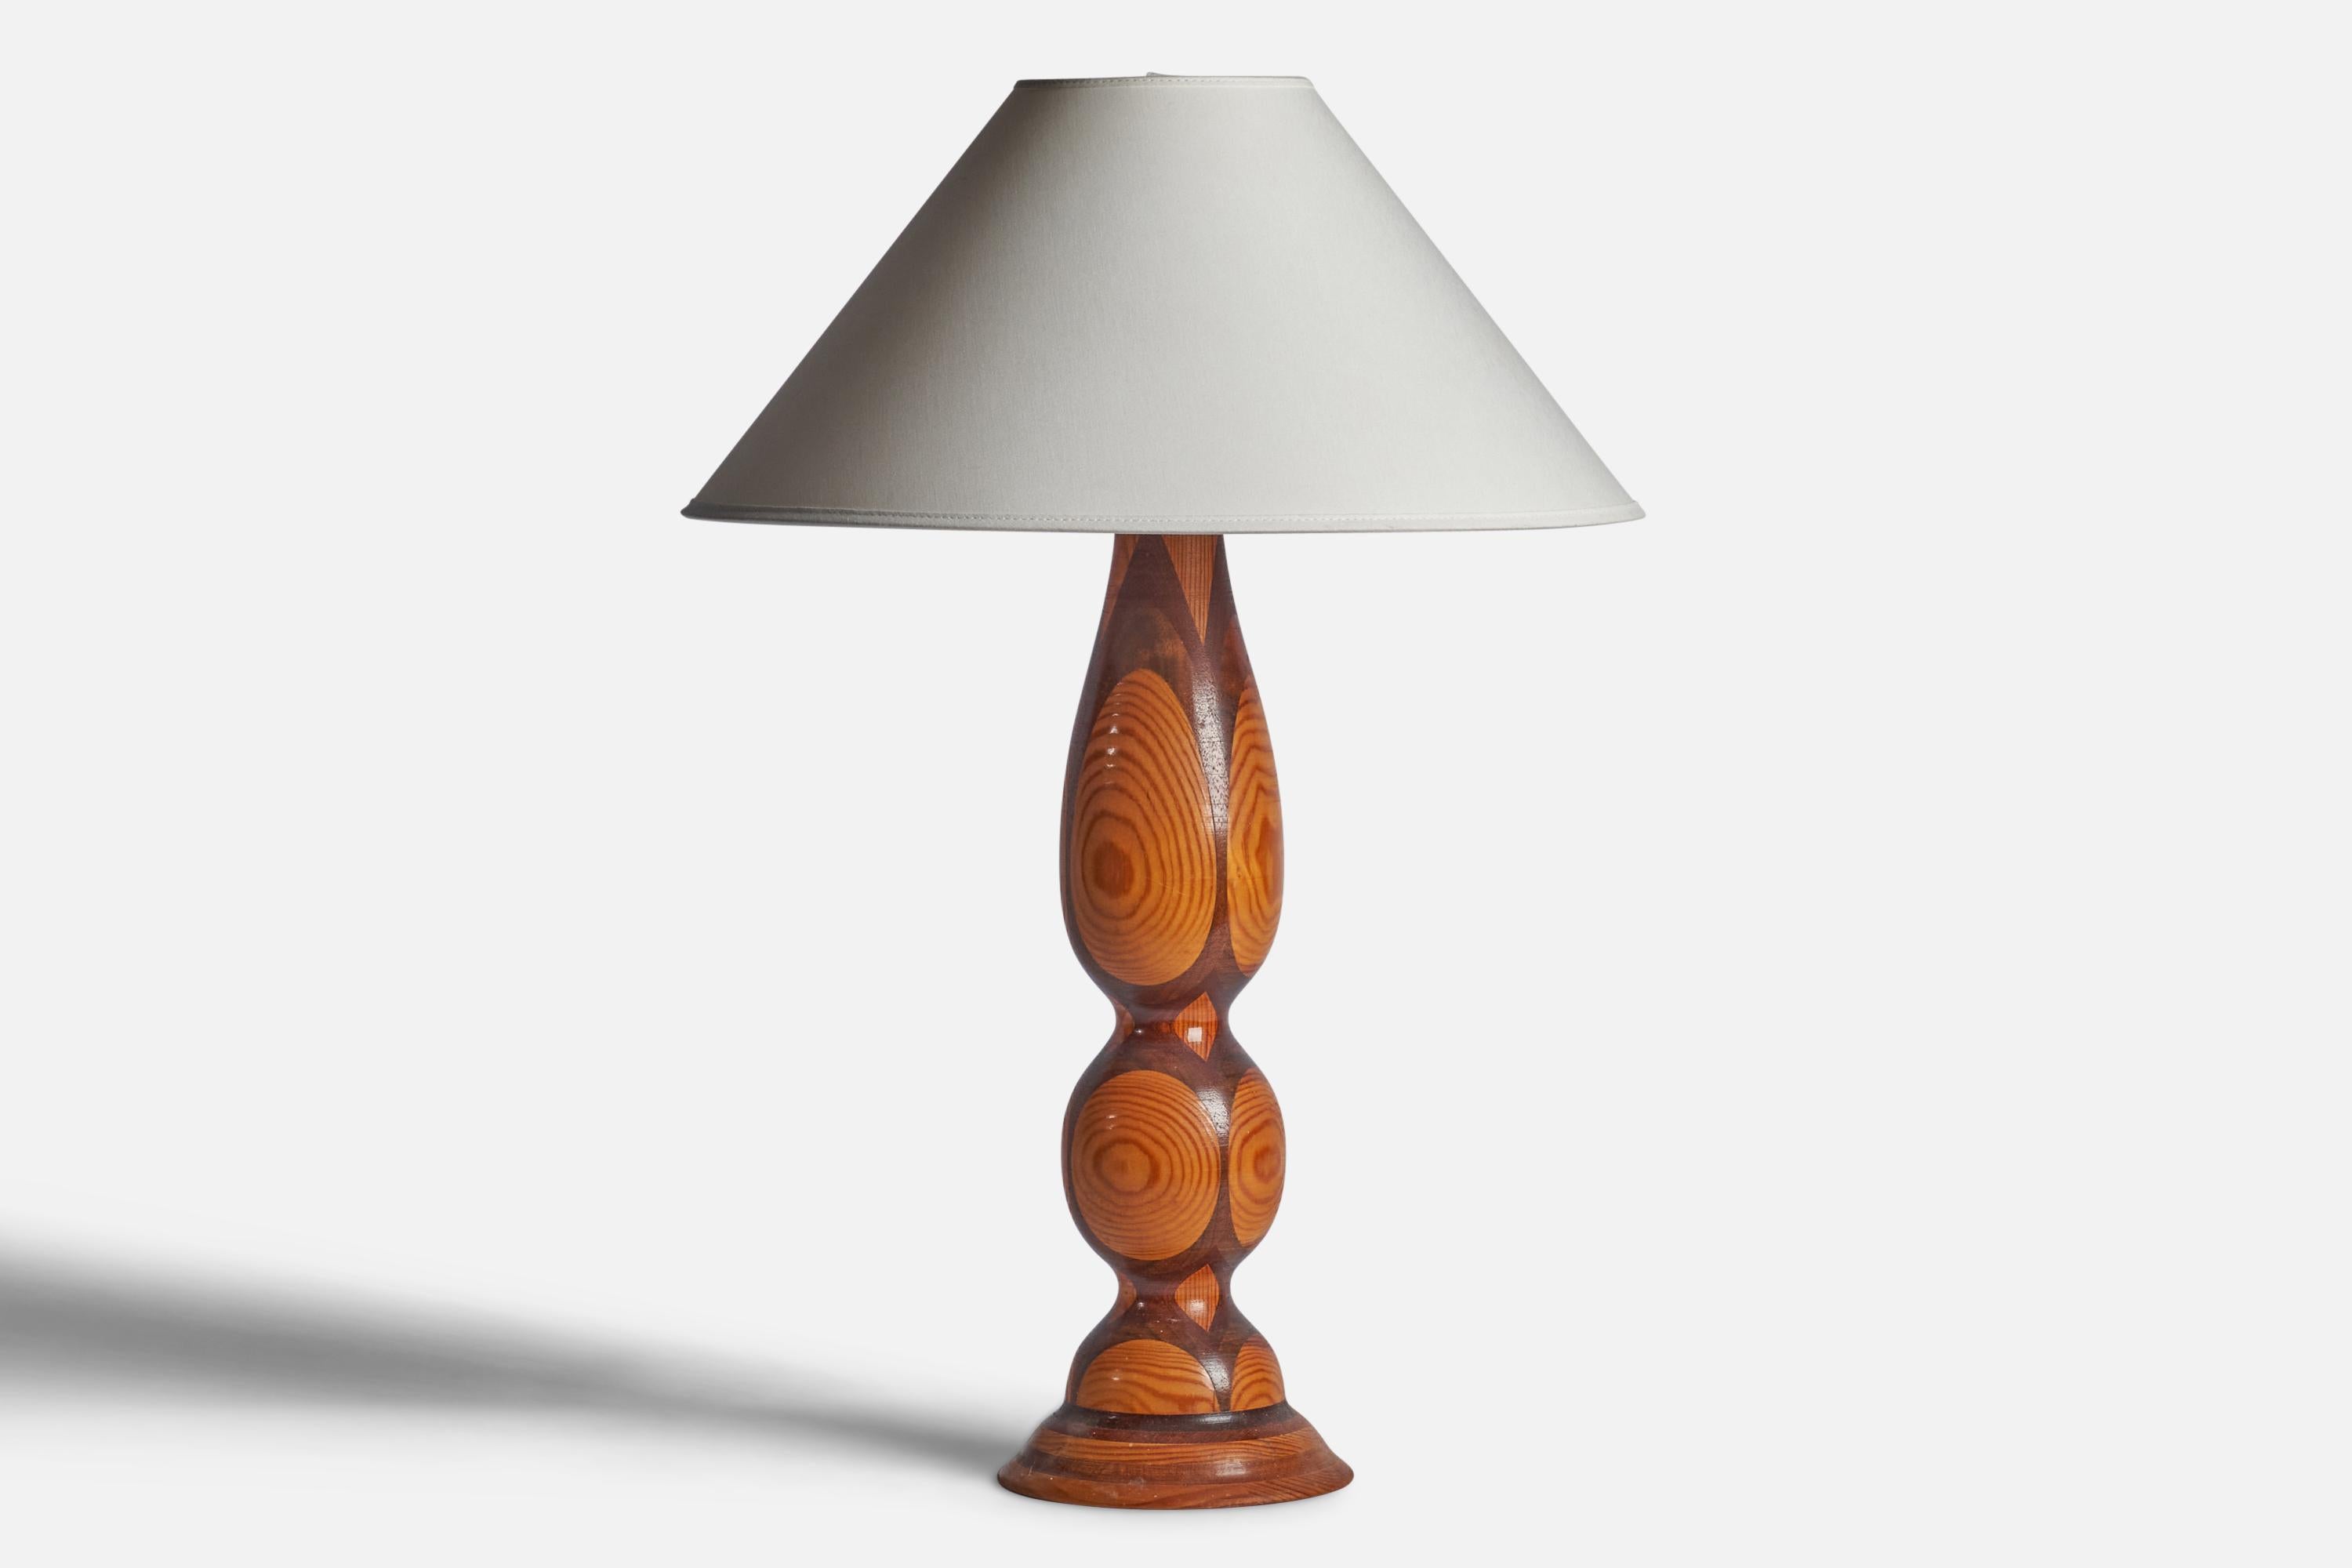 A stack-laminated and turned walnut and pine table lamp designed and produced in the US, 1950s.

Dimensions of Lamp (inches): 19.55” H x 5.85” Diameter
Dimensions of Shade (inches): 4.5” Top Diameter x 16” Bottom Diameter x 7.15” H 
Dimensions of